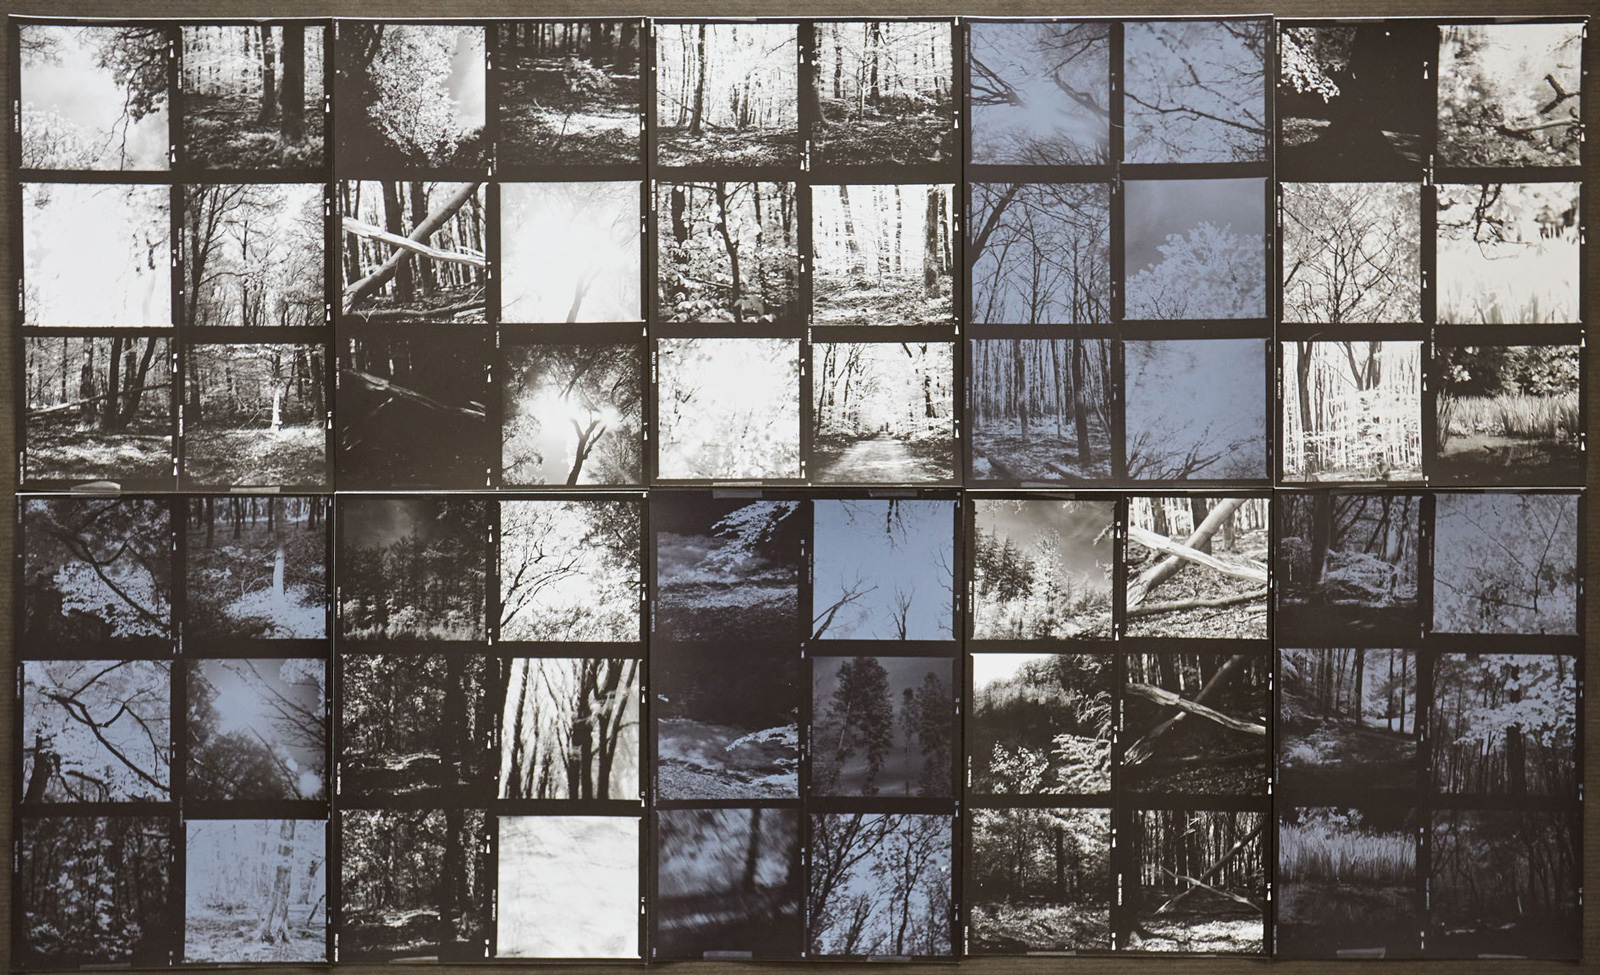 Off grid, 2020 - Fixed and unfixed contact prints on silver-gelatine paper, 110x80cm